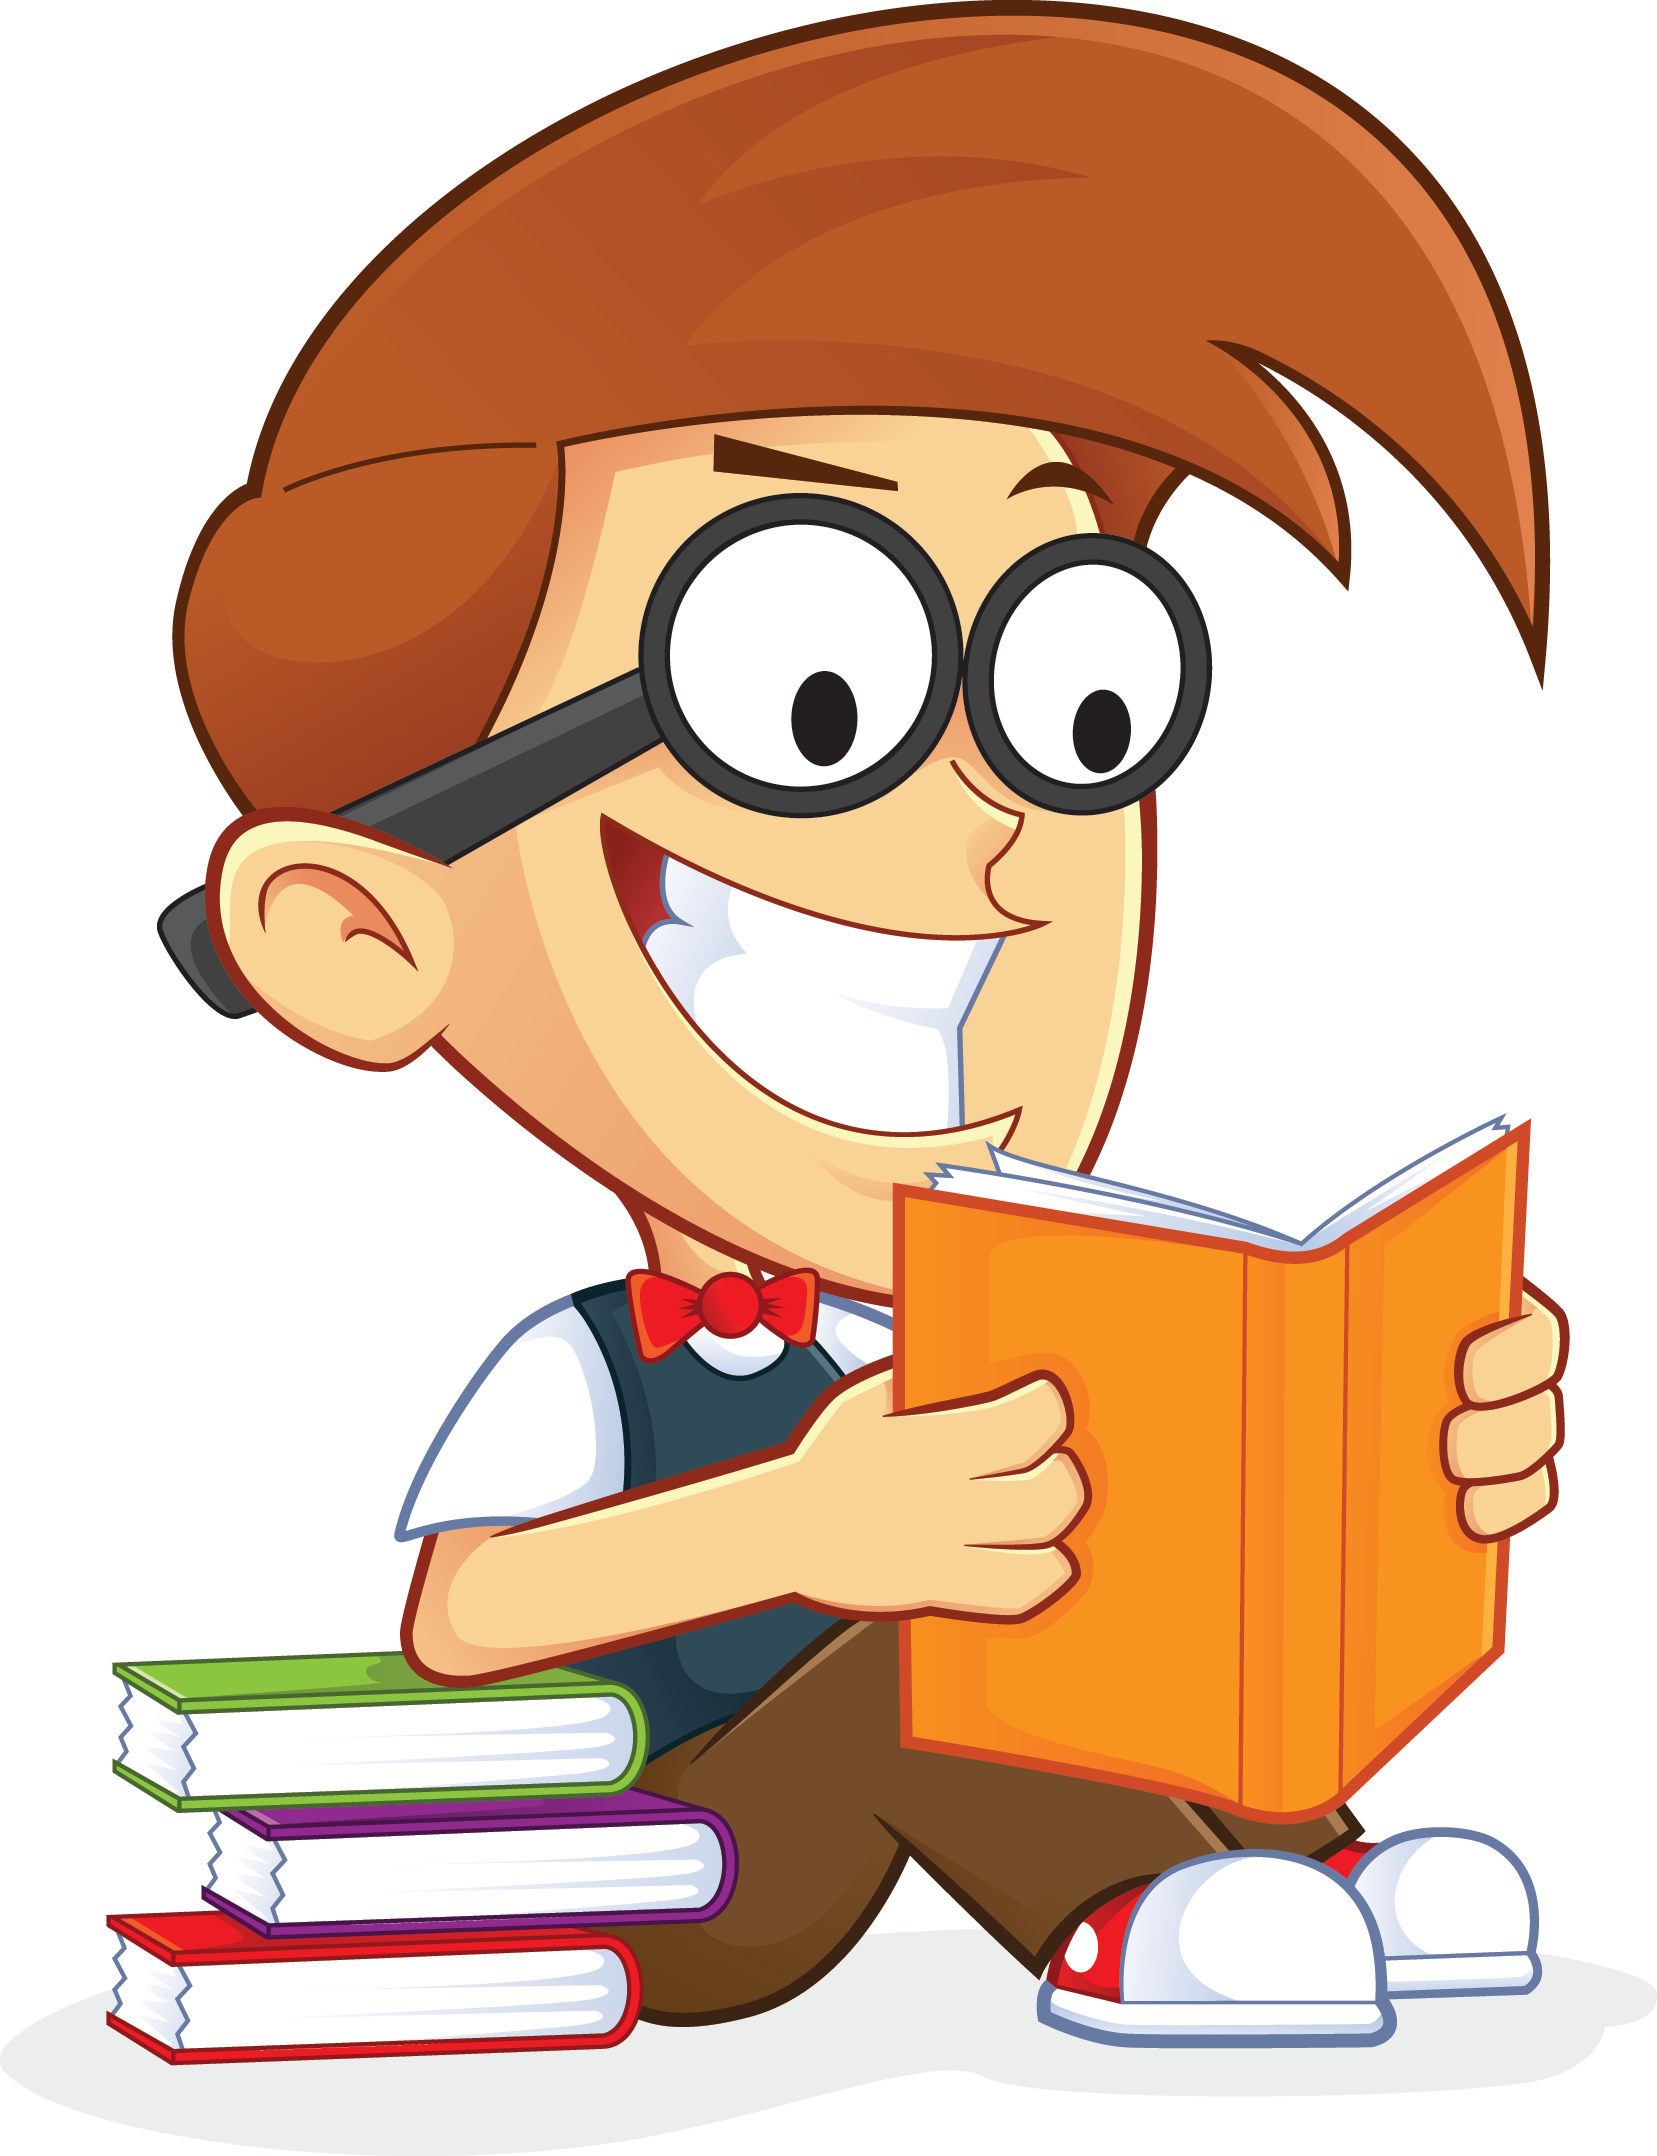 Boy Little Reading Book Photos PNG Image